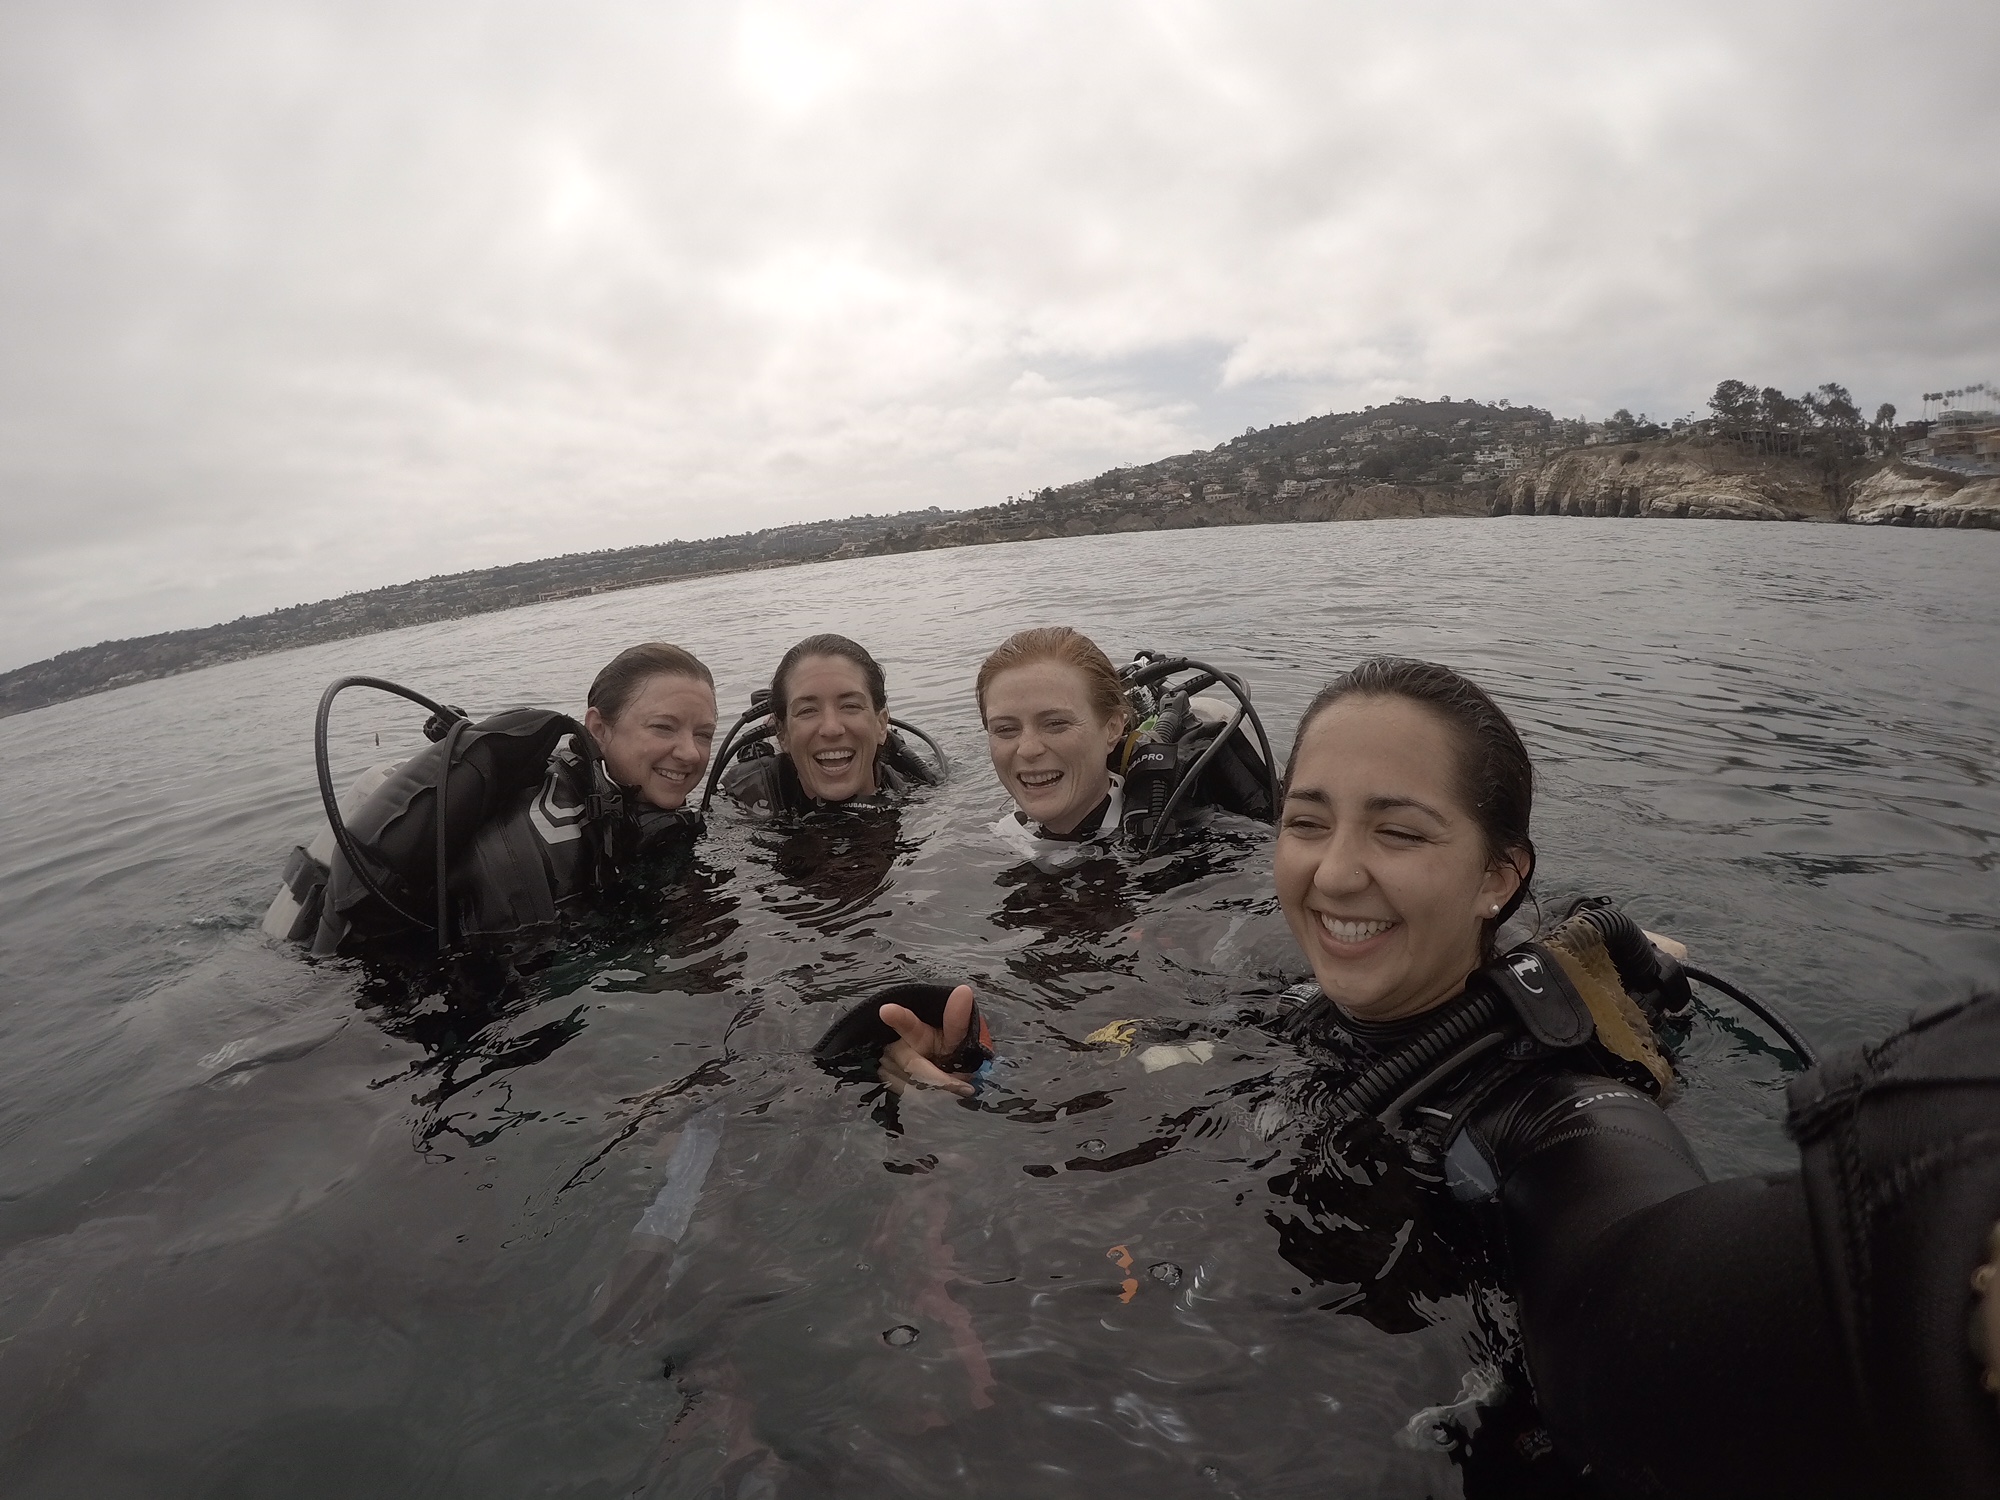 Four women in scuba gear, at the surface of the water smiling and laughing